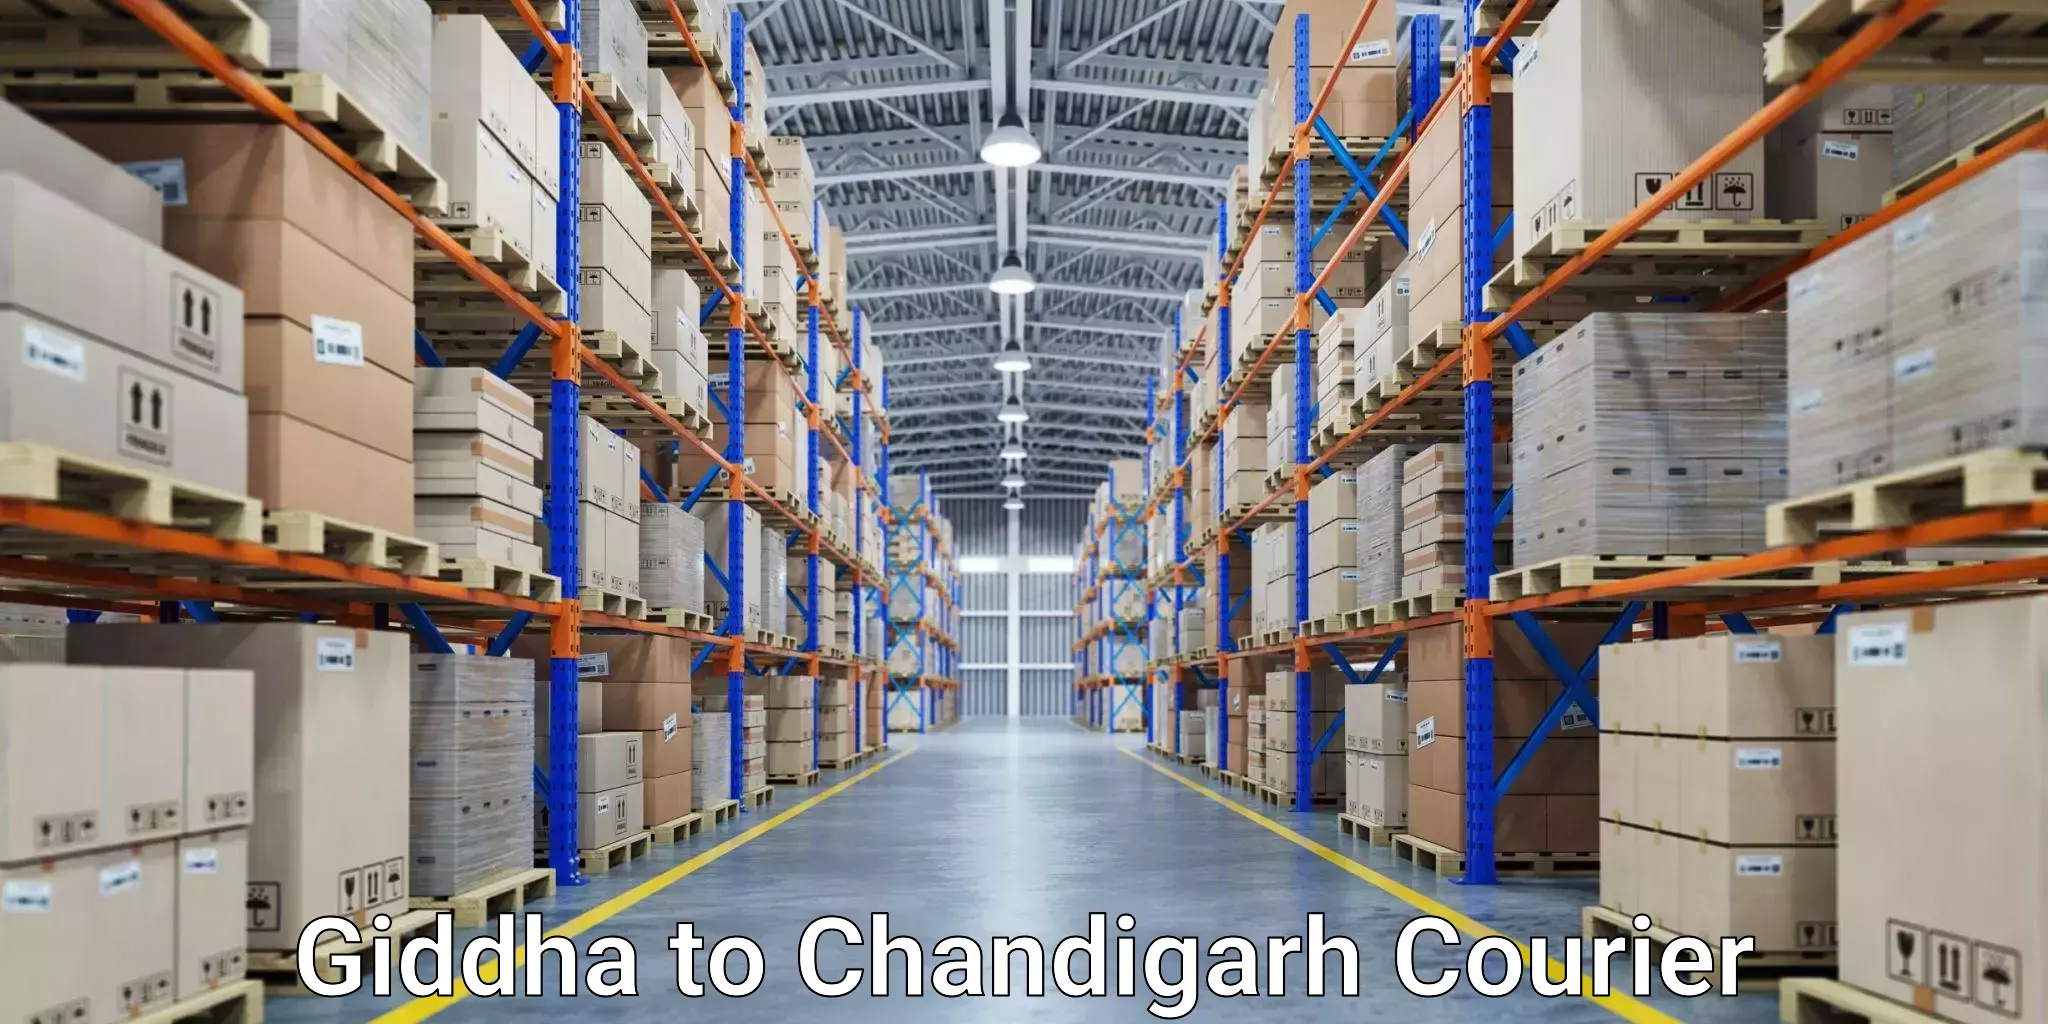 Global freight services Giddha to Chandigarh